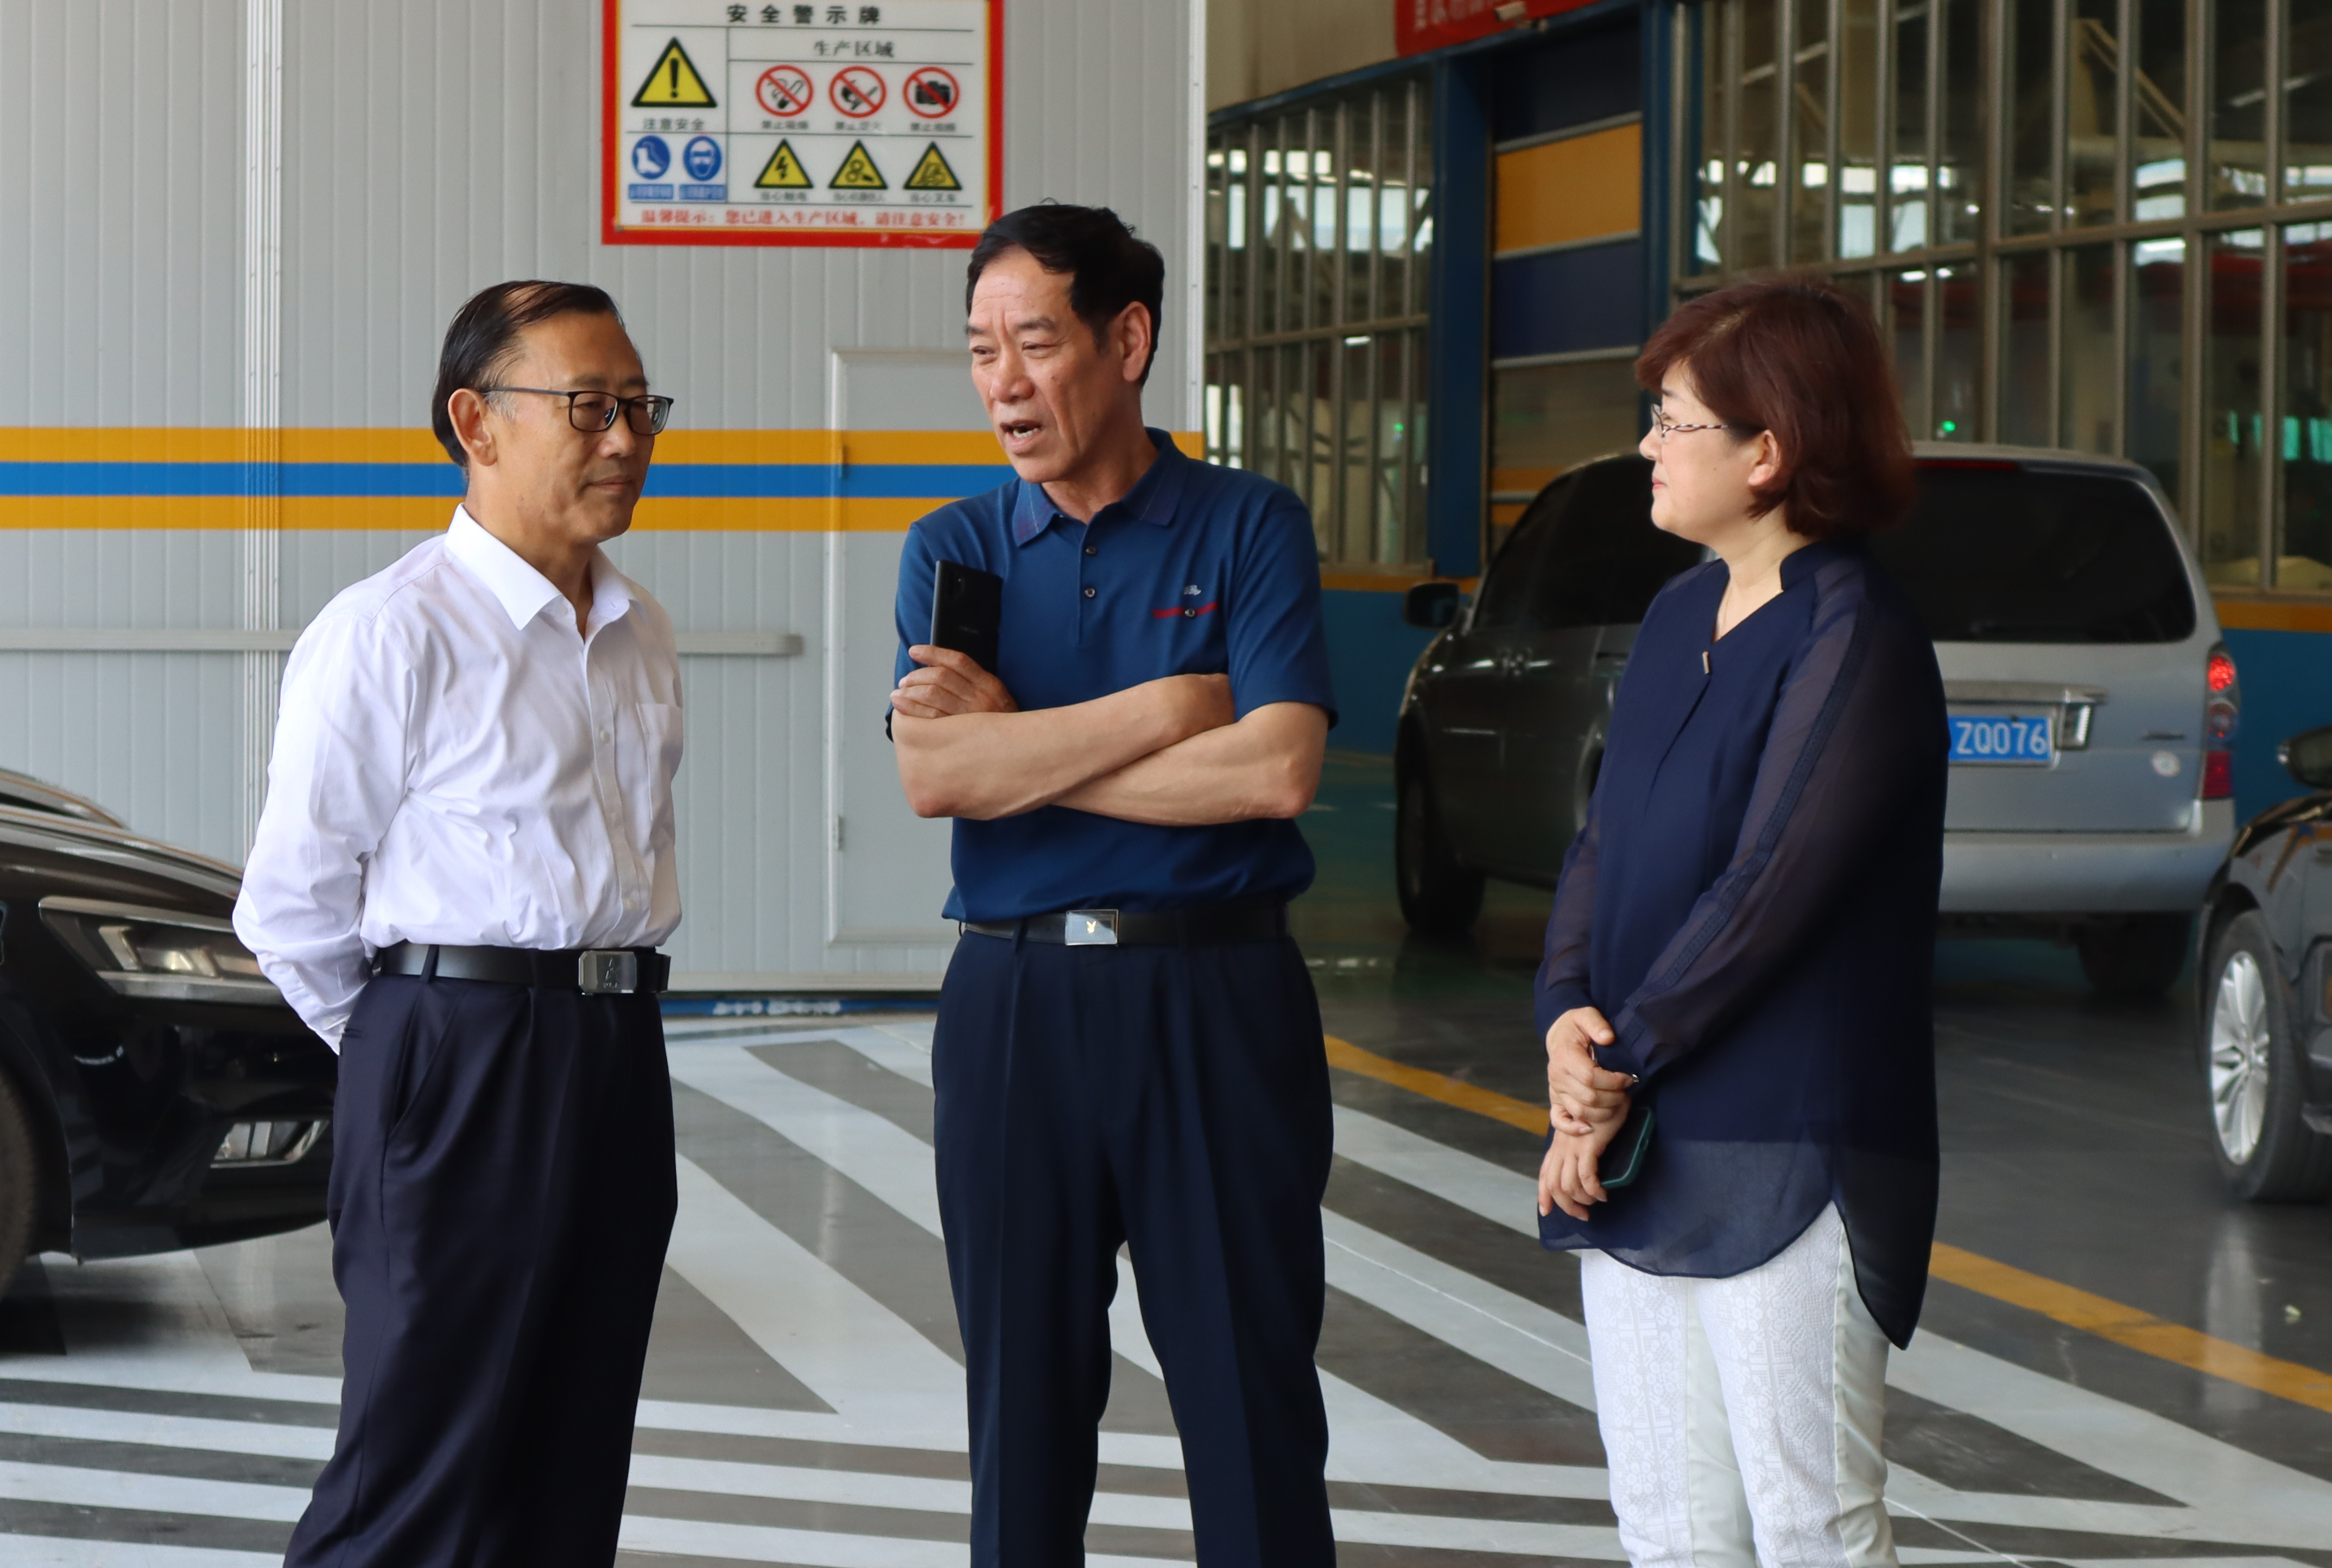 Chen Ruxiao, a member of the party group of Weifang Municipal Government, visited our company